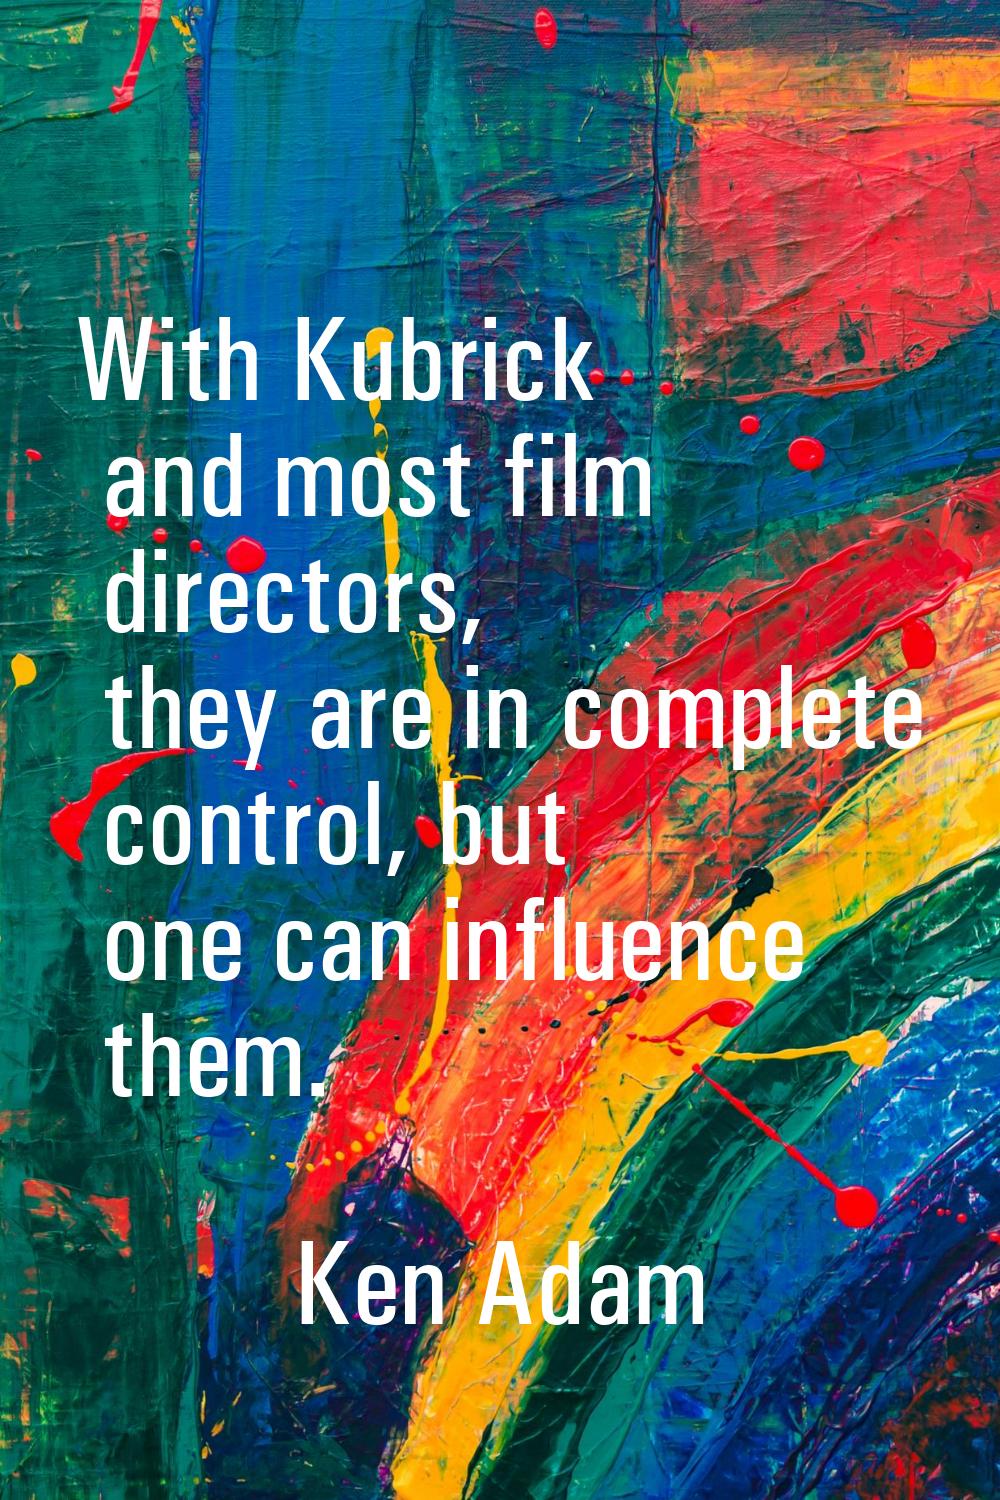 With Kubrick and most film directors, they are in complete control, but one can influence them.